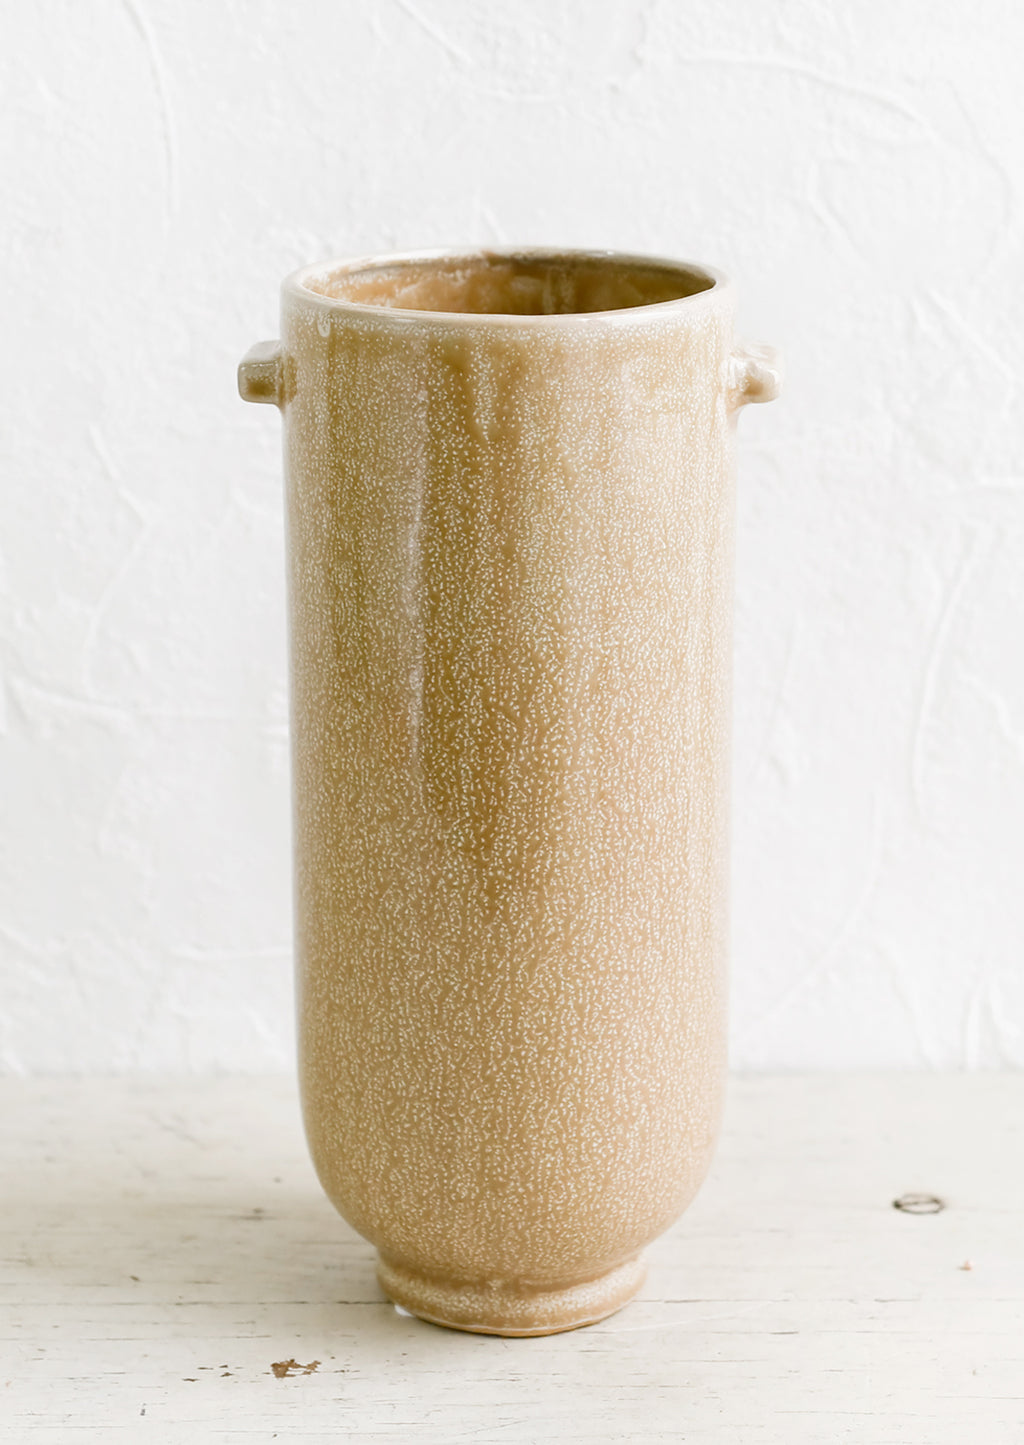 1: A tall, cylindrical ceramic vase in speckled brown glaze with decorative tab detailing at top.